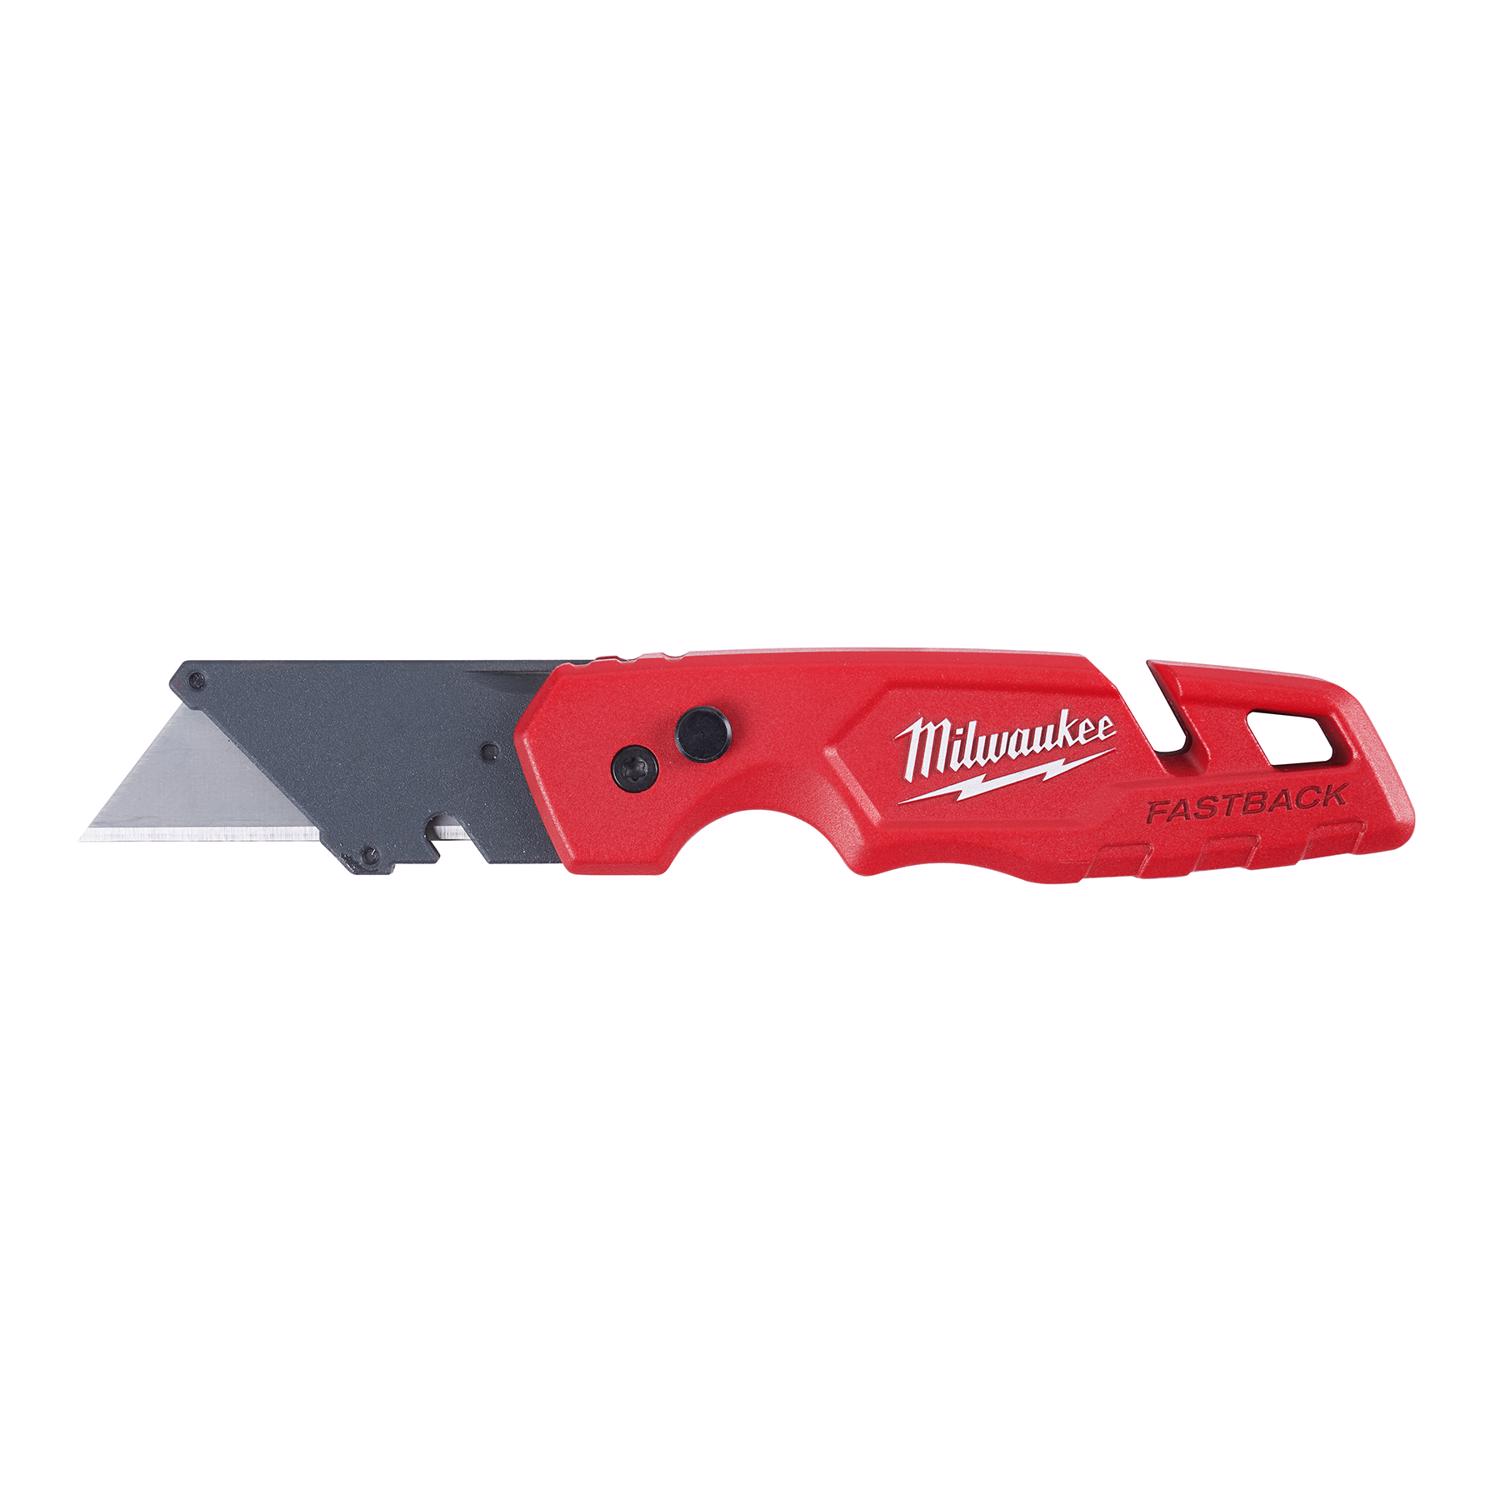 Photos - Utility Knife Milwaukee Fastback 7-1/4 in. Press and Flip Folding  Red 1 pc 